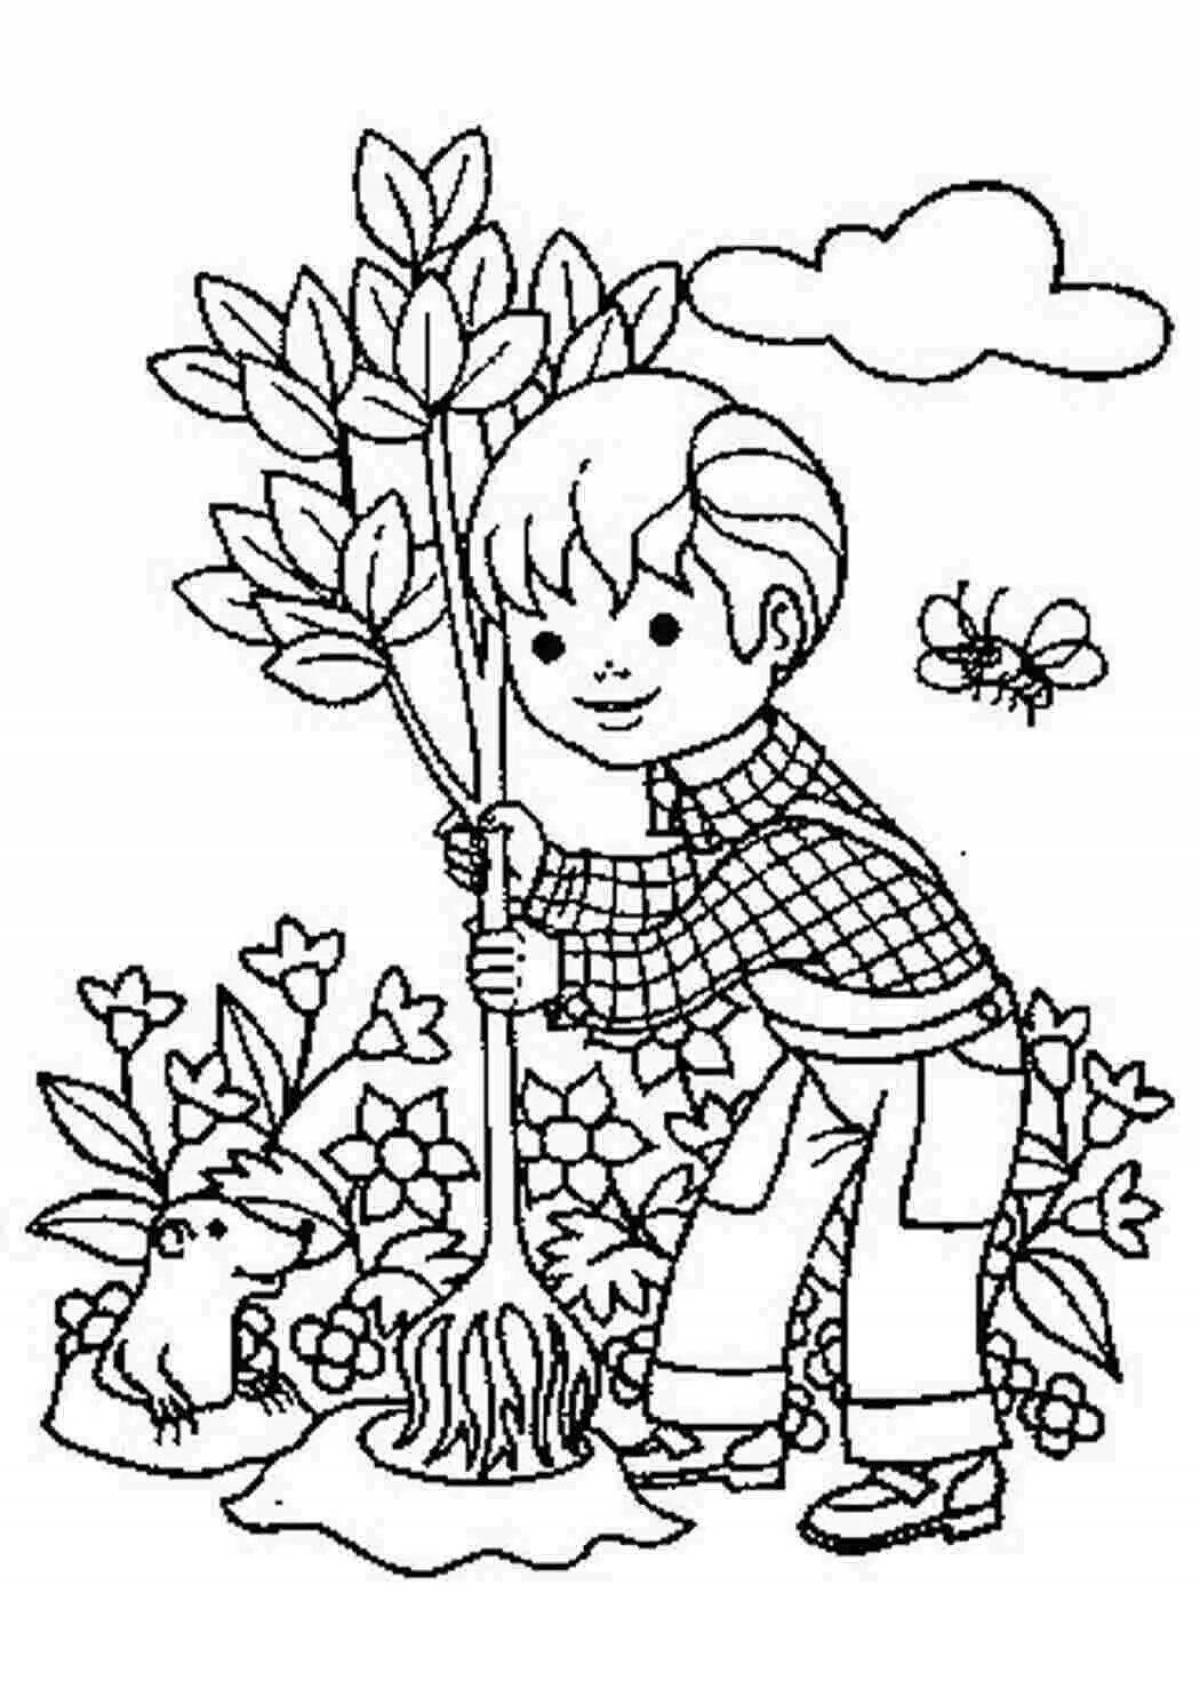 Informative environmental care coloring page